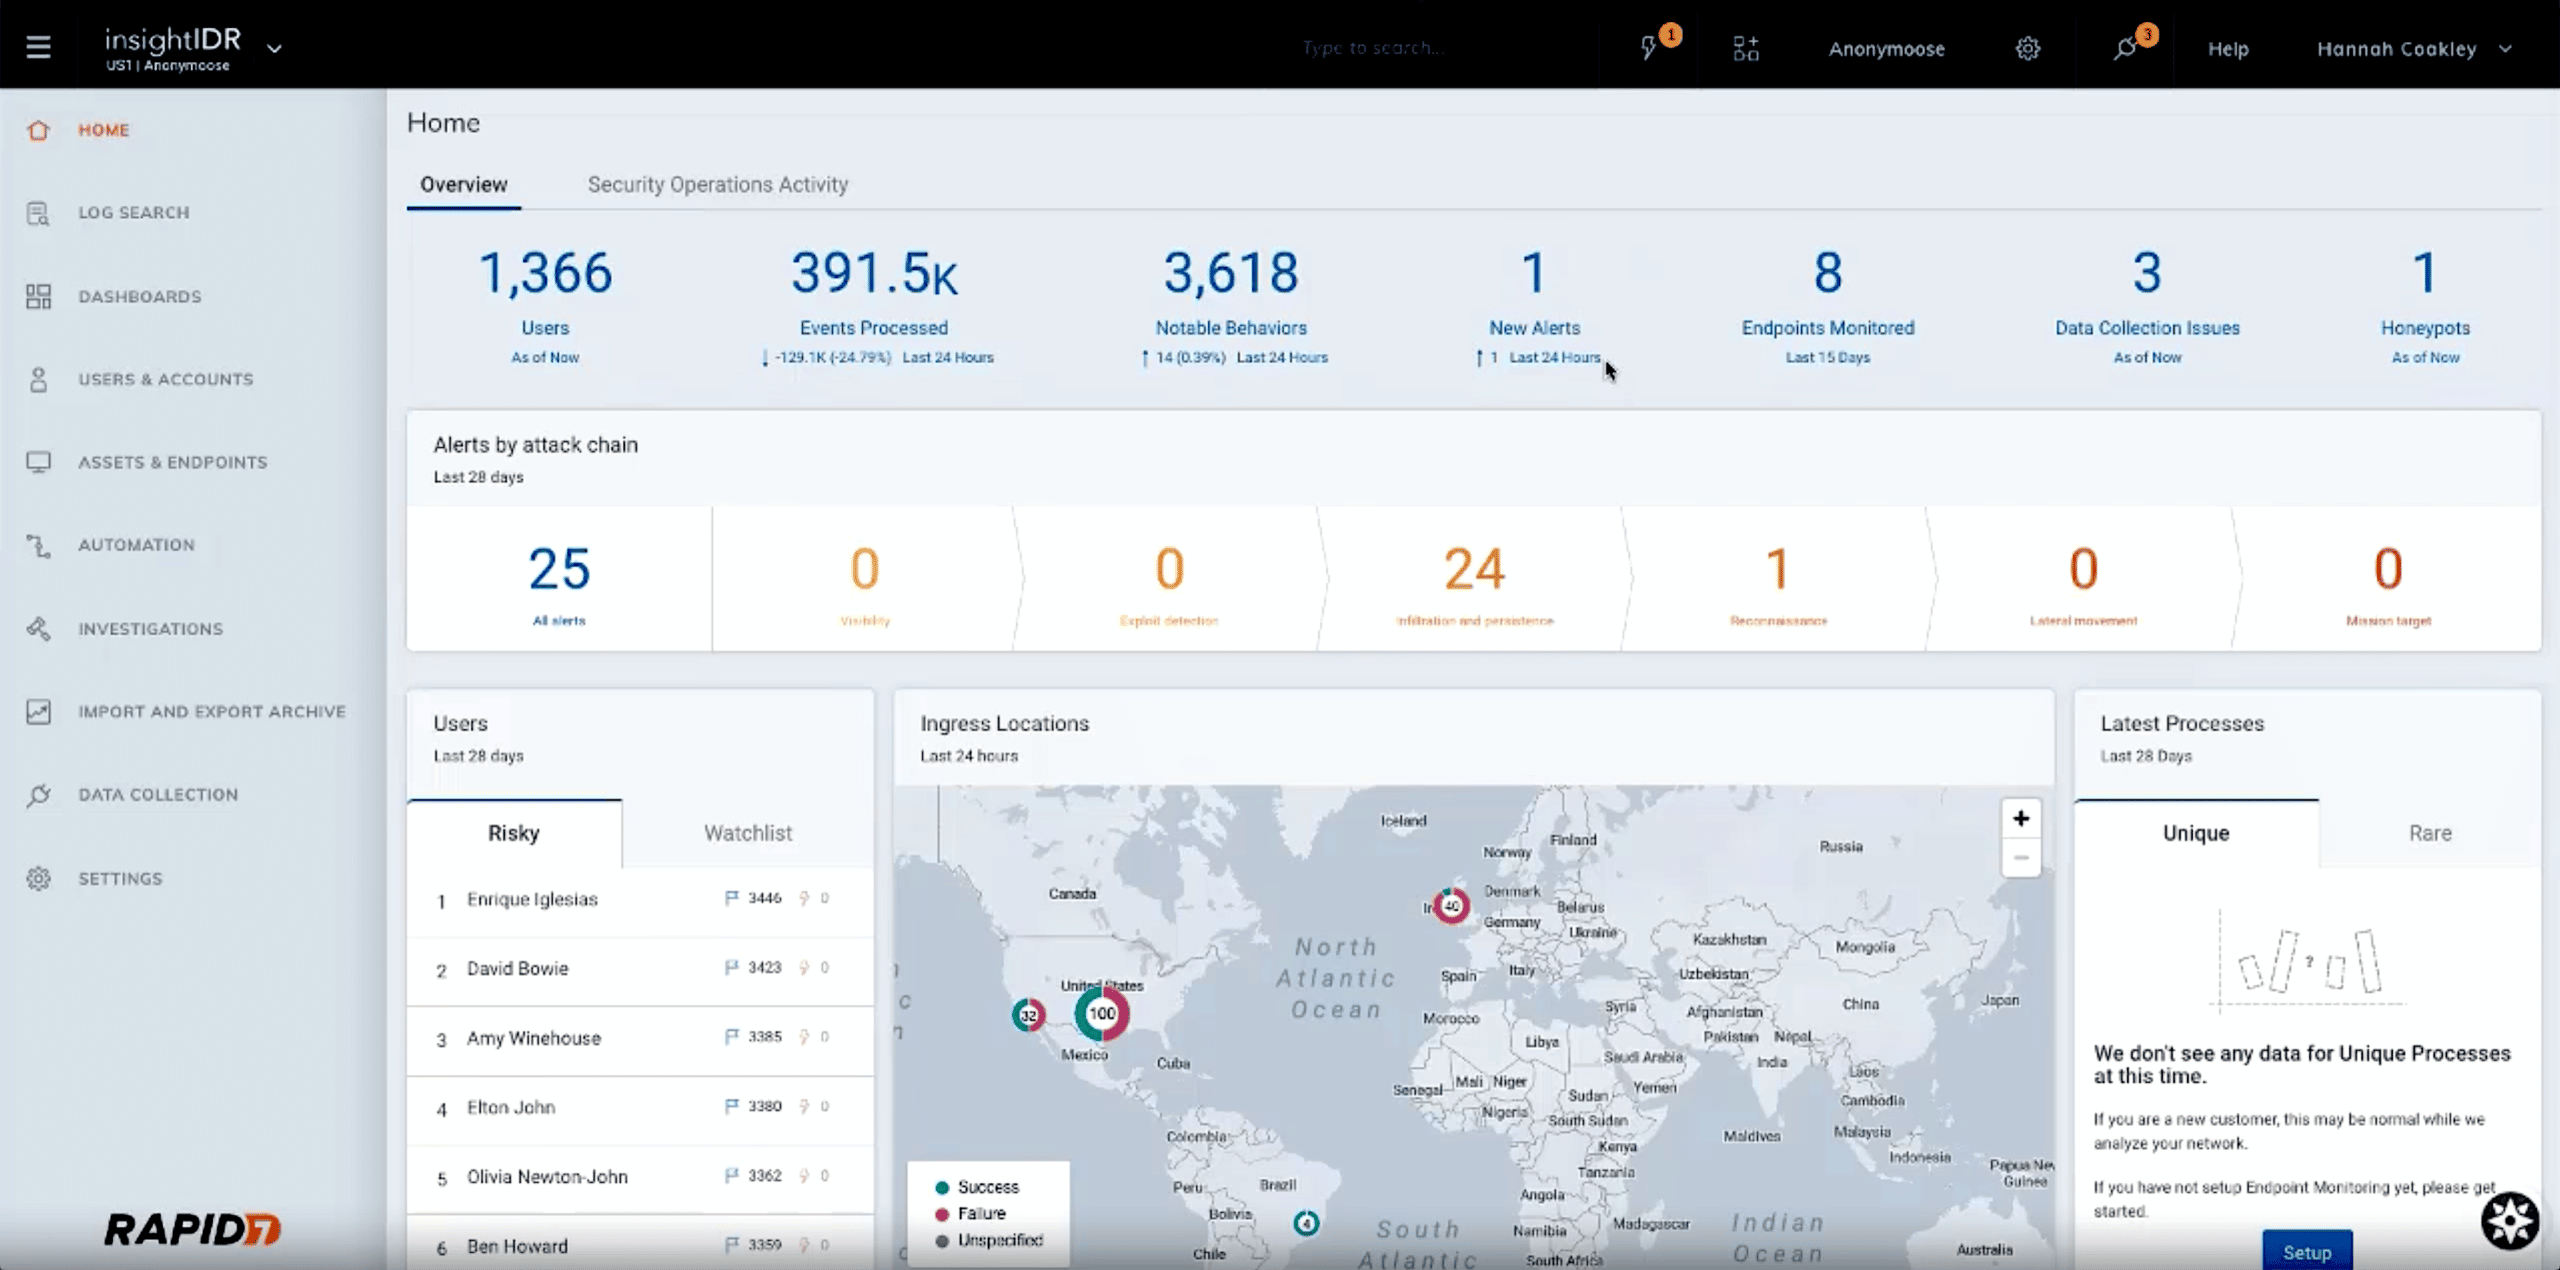 From the InsightIDR home dashboard, administrators can see metrics like users, events processed, notable behaviors, new alerts, honeypots, and more.